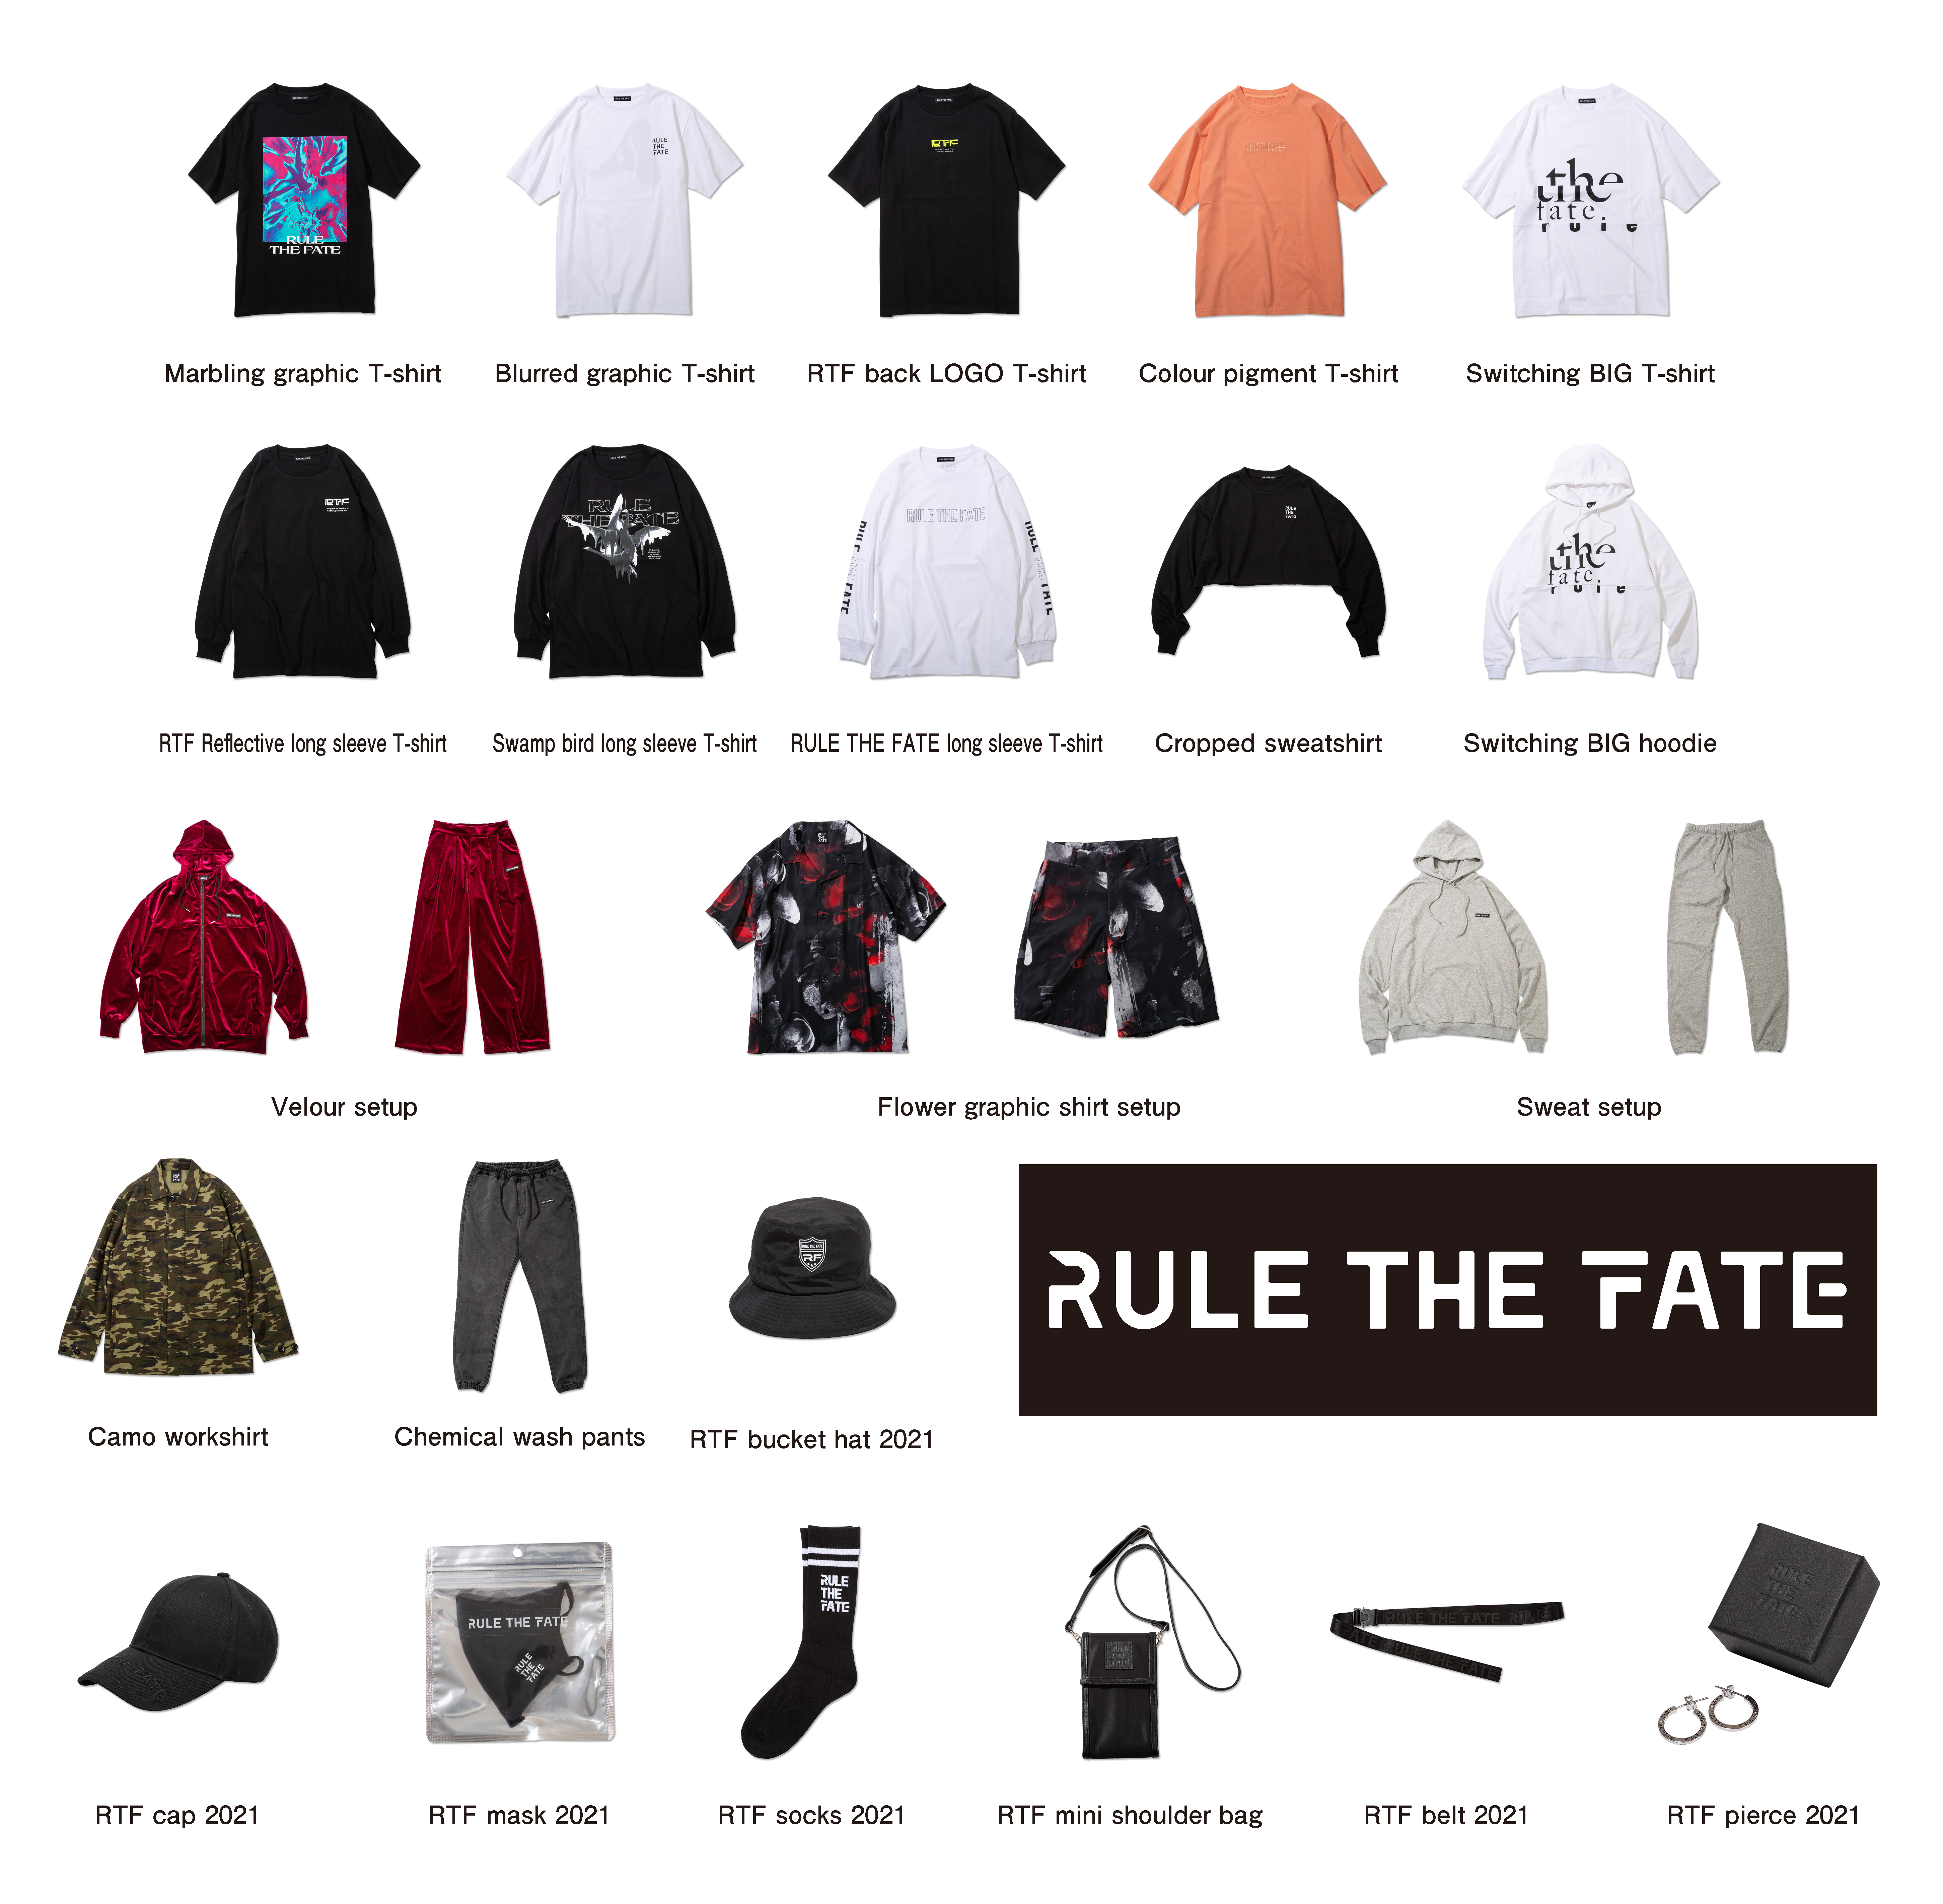 RULE THE FATE　ロゴ　Tシャツ